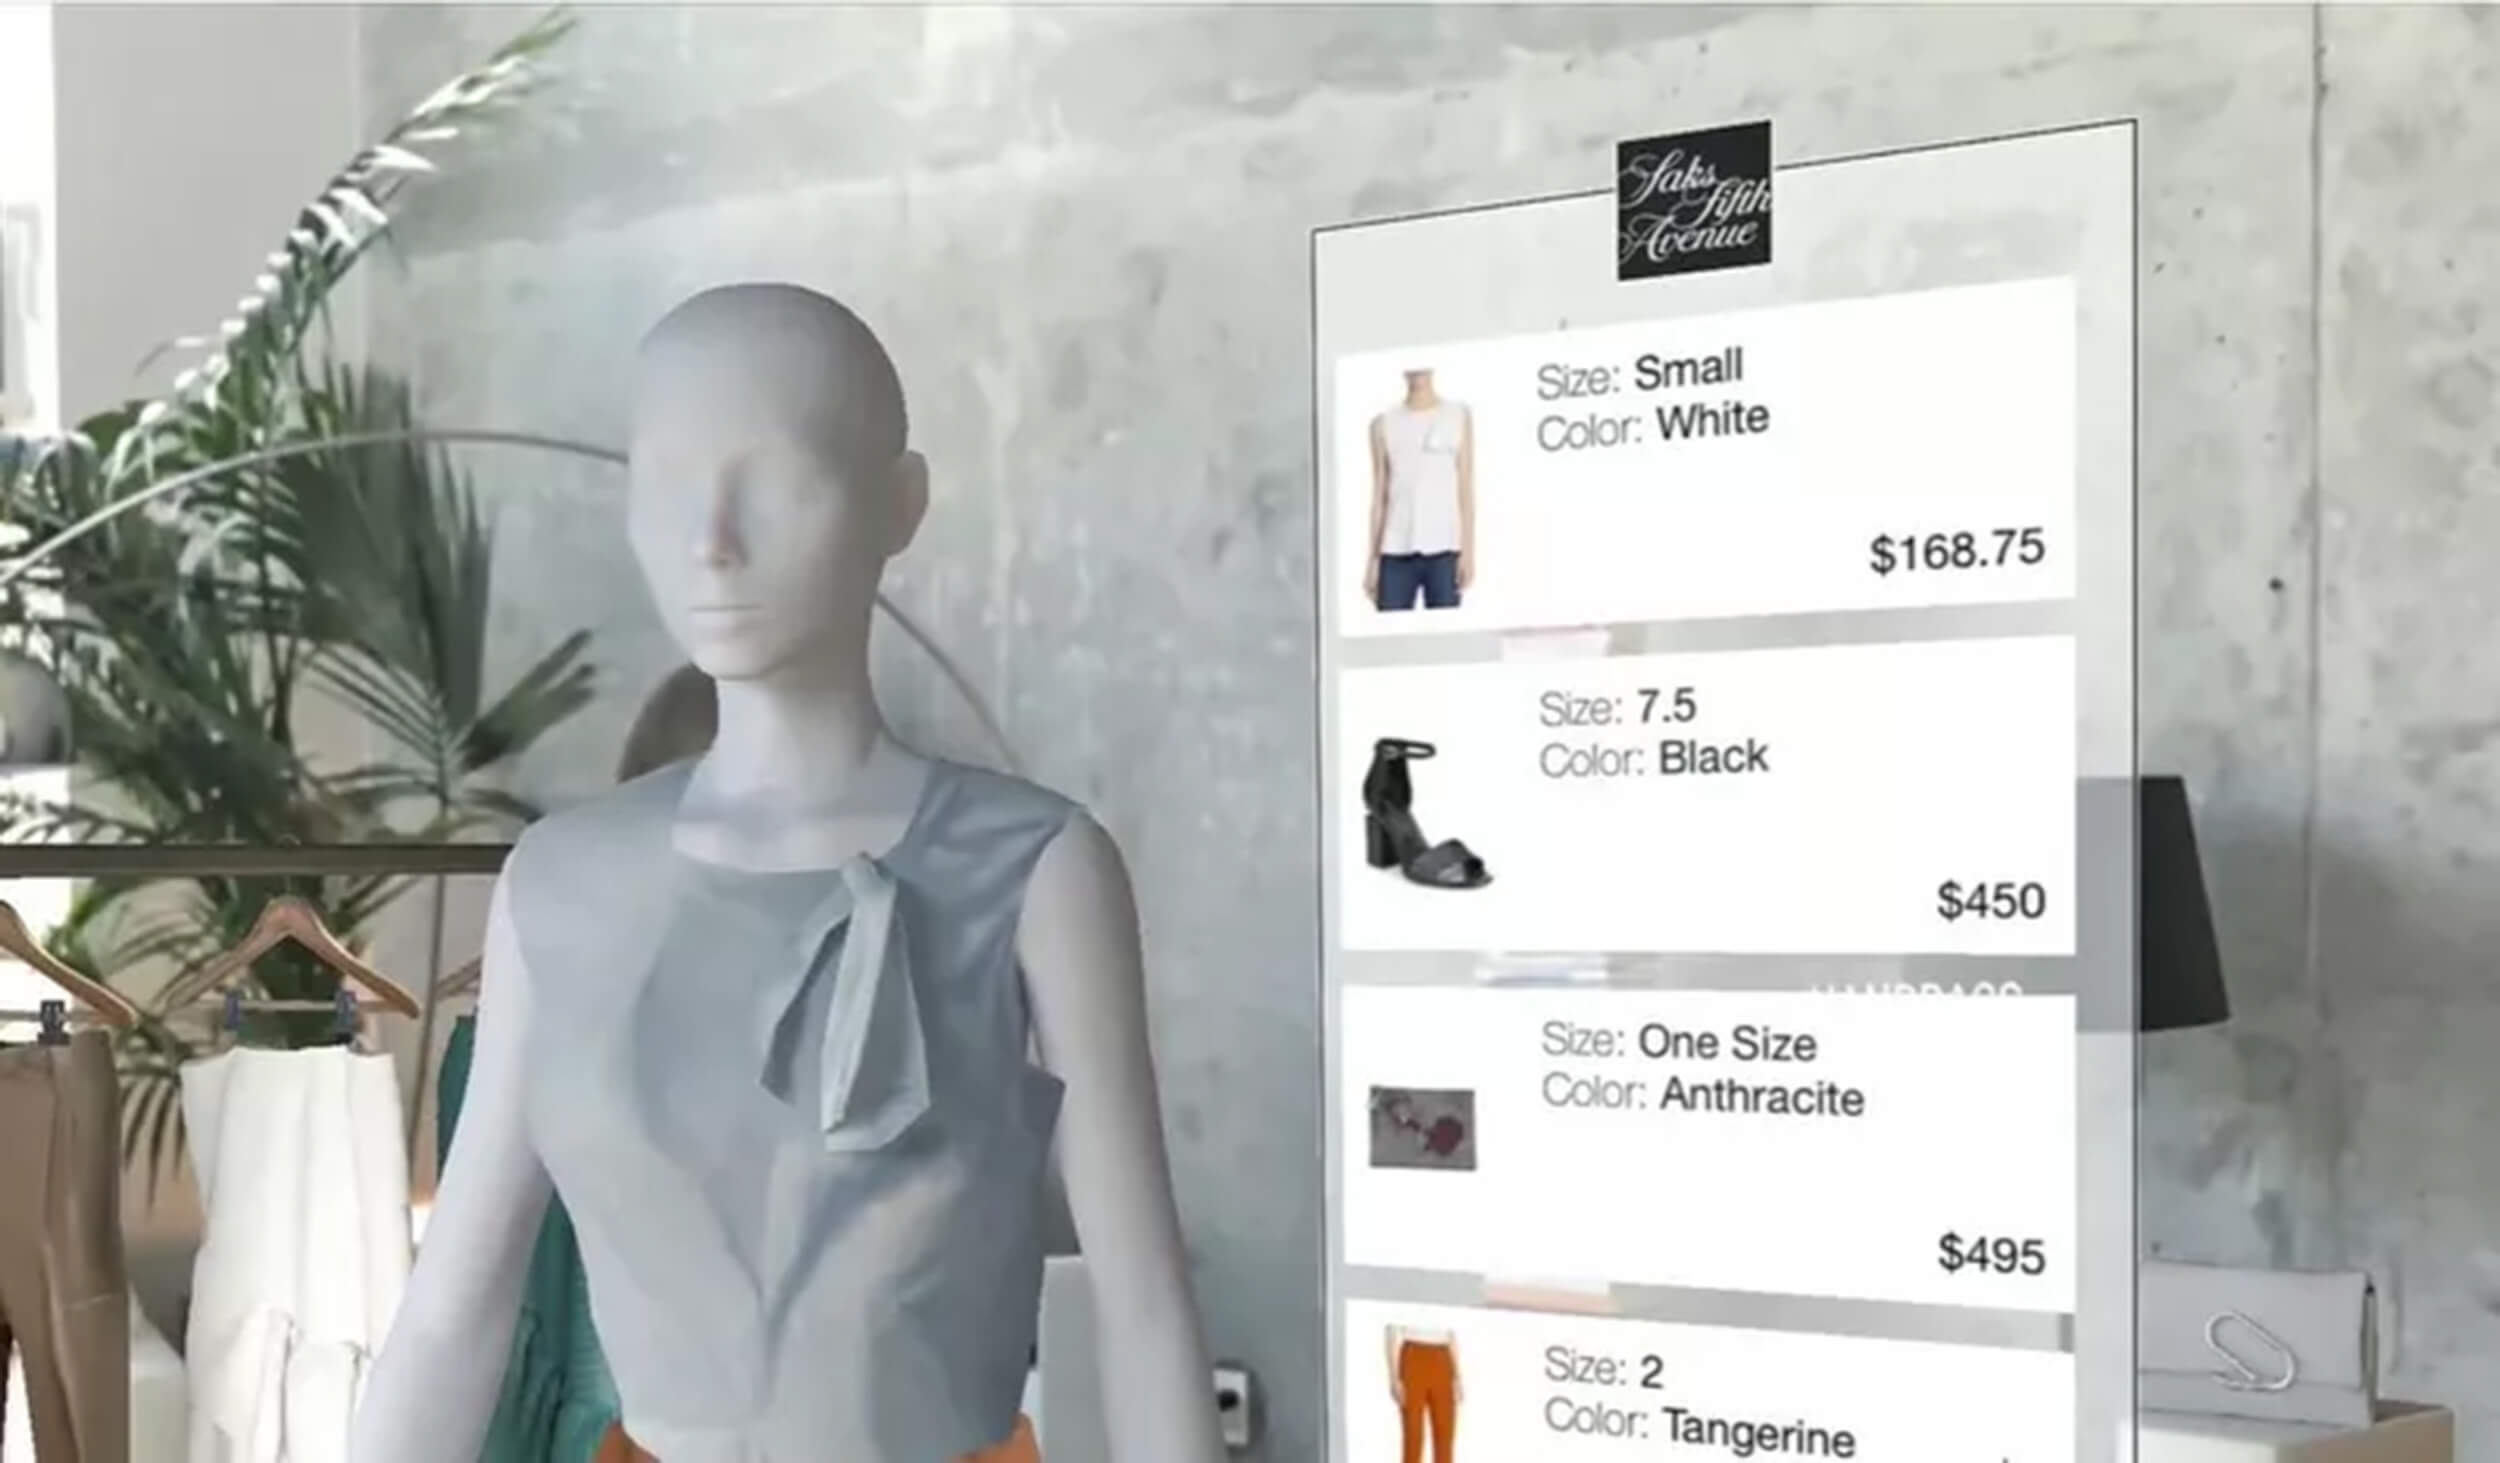 Online shoppers can customize and preview items before purchase using AR